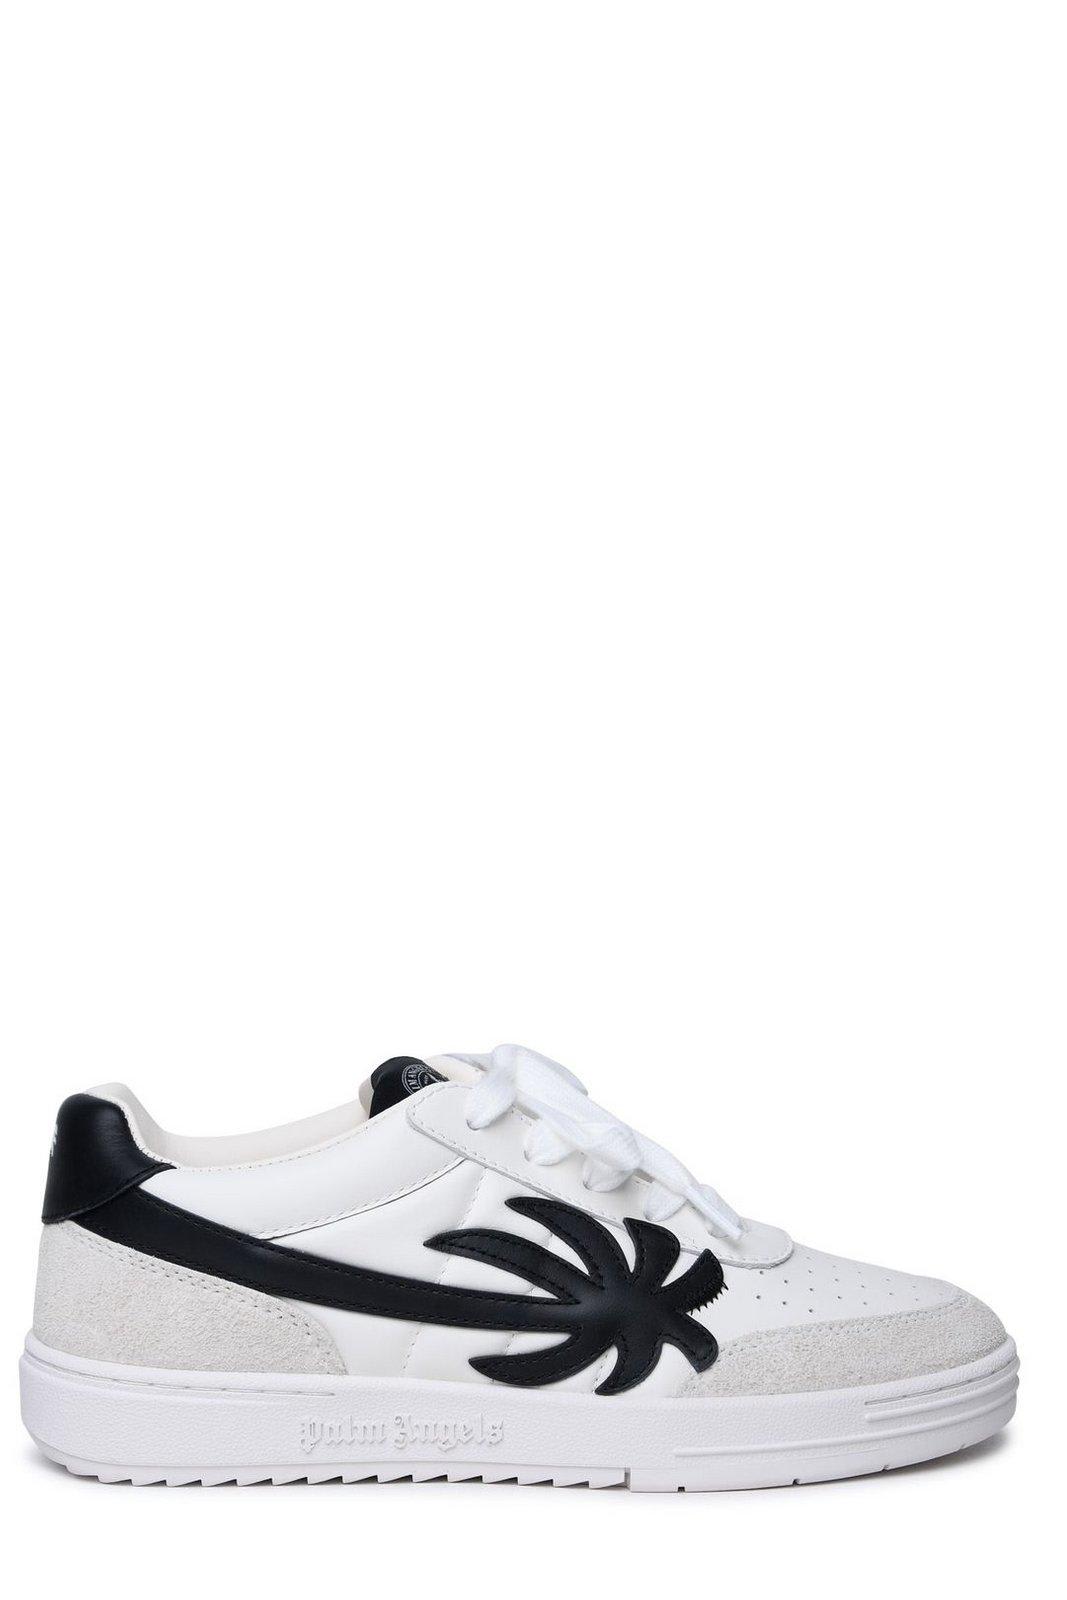 Palm Angels Palm Beach University Low-top Sneakers In White